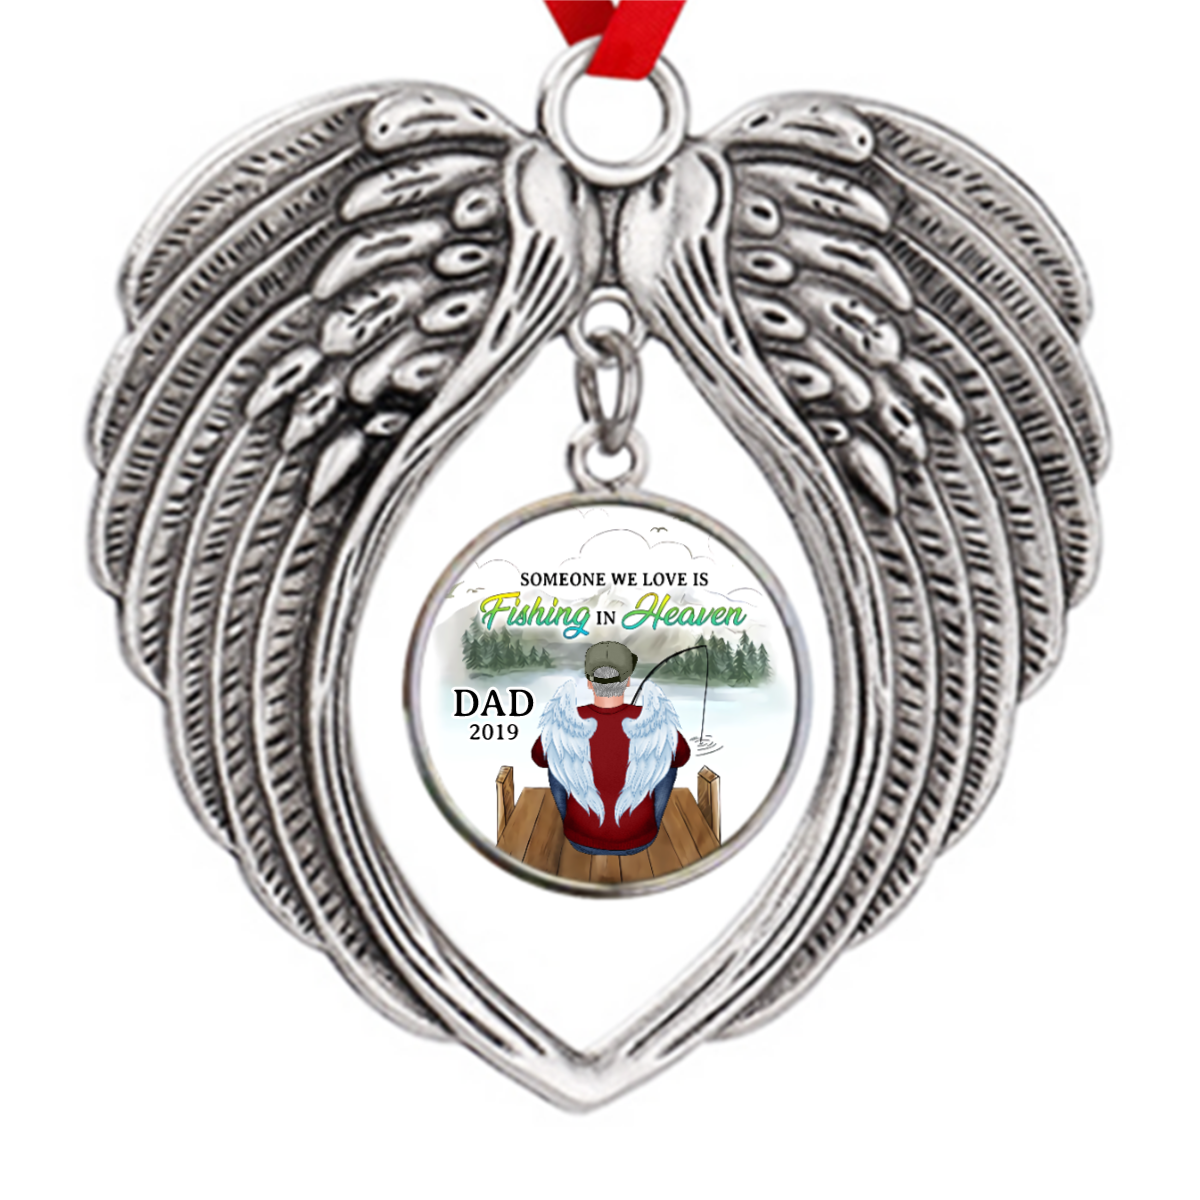 Someone We Love Fishing In Heaven Personalized Zinc Alloy Ornaments